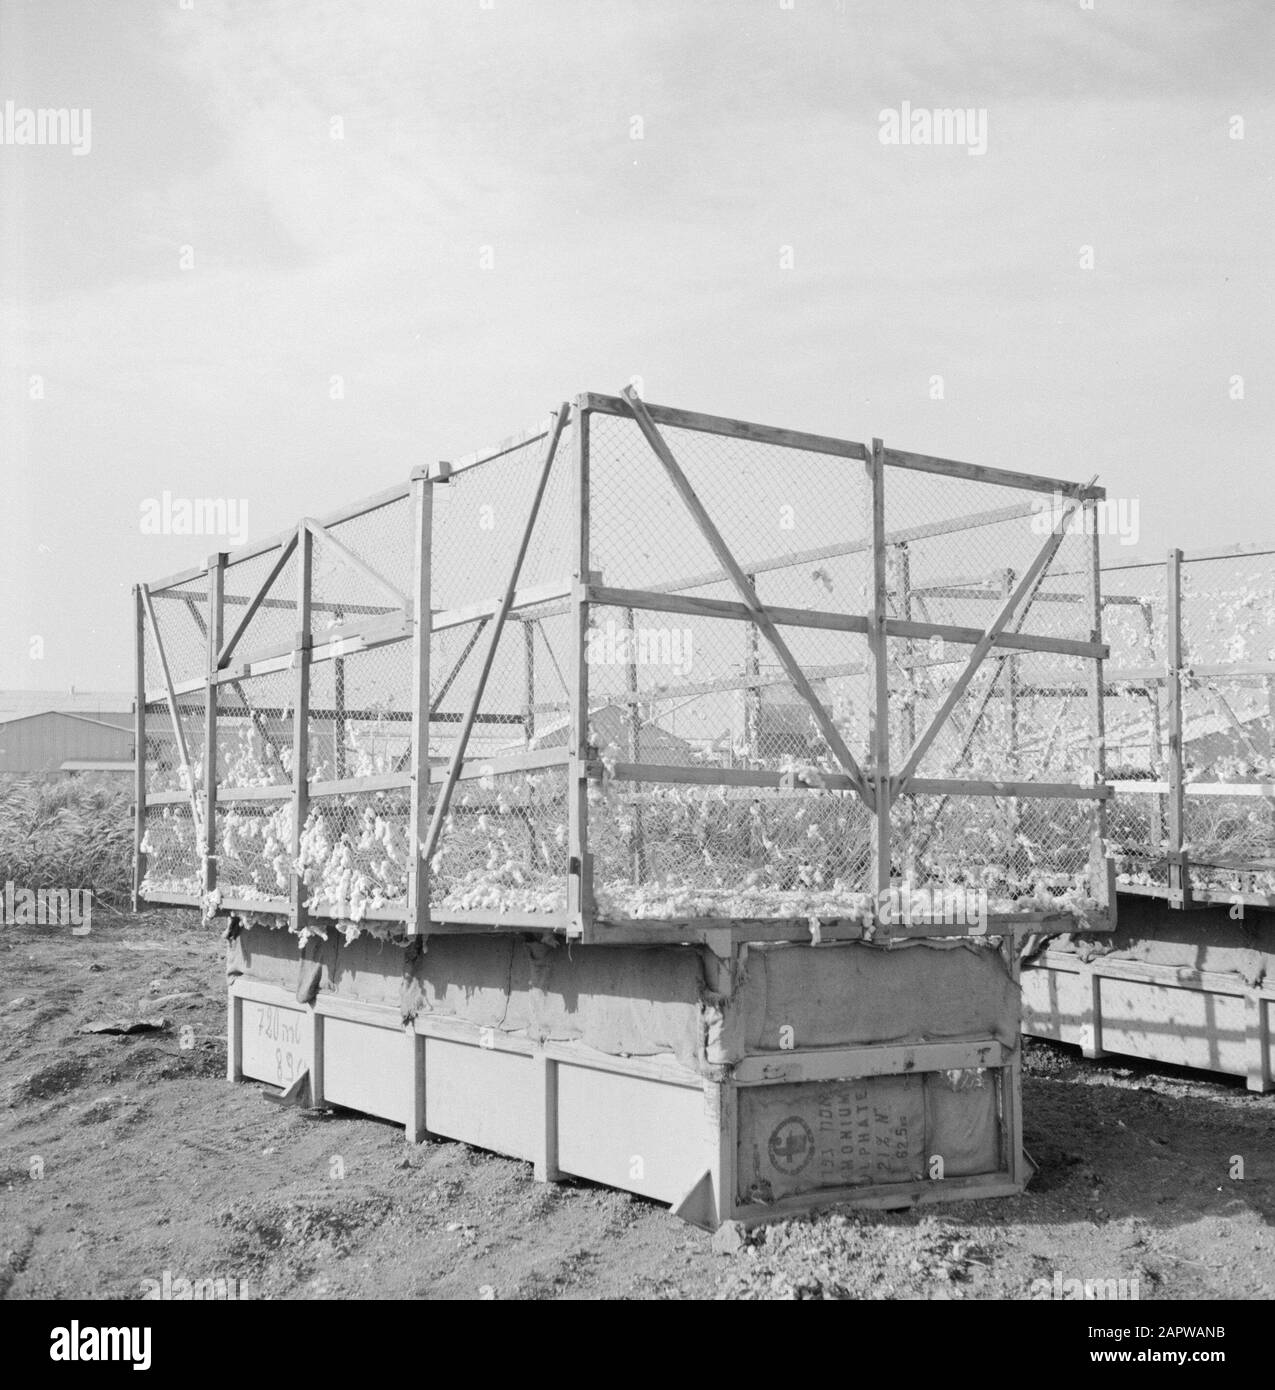 Israel: Huleh  Agricultural machine for the cotton harvest Date: undated Location: Huleh, Israel Keywords: arable, cotton, machines Stock Photo